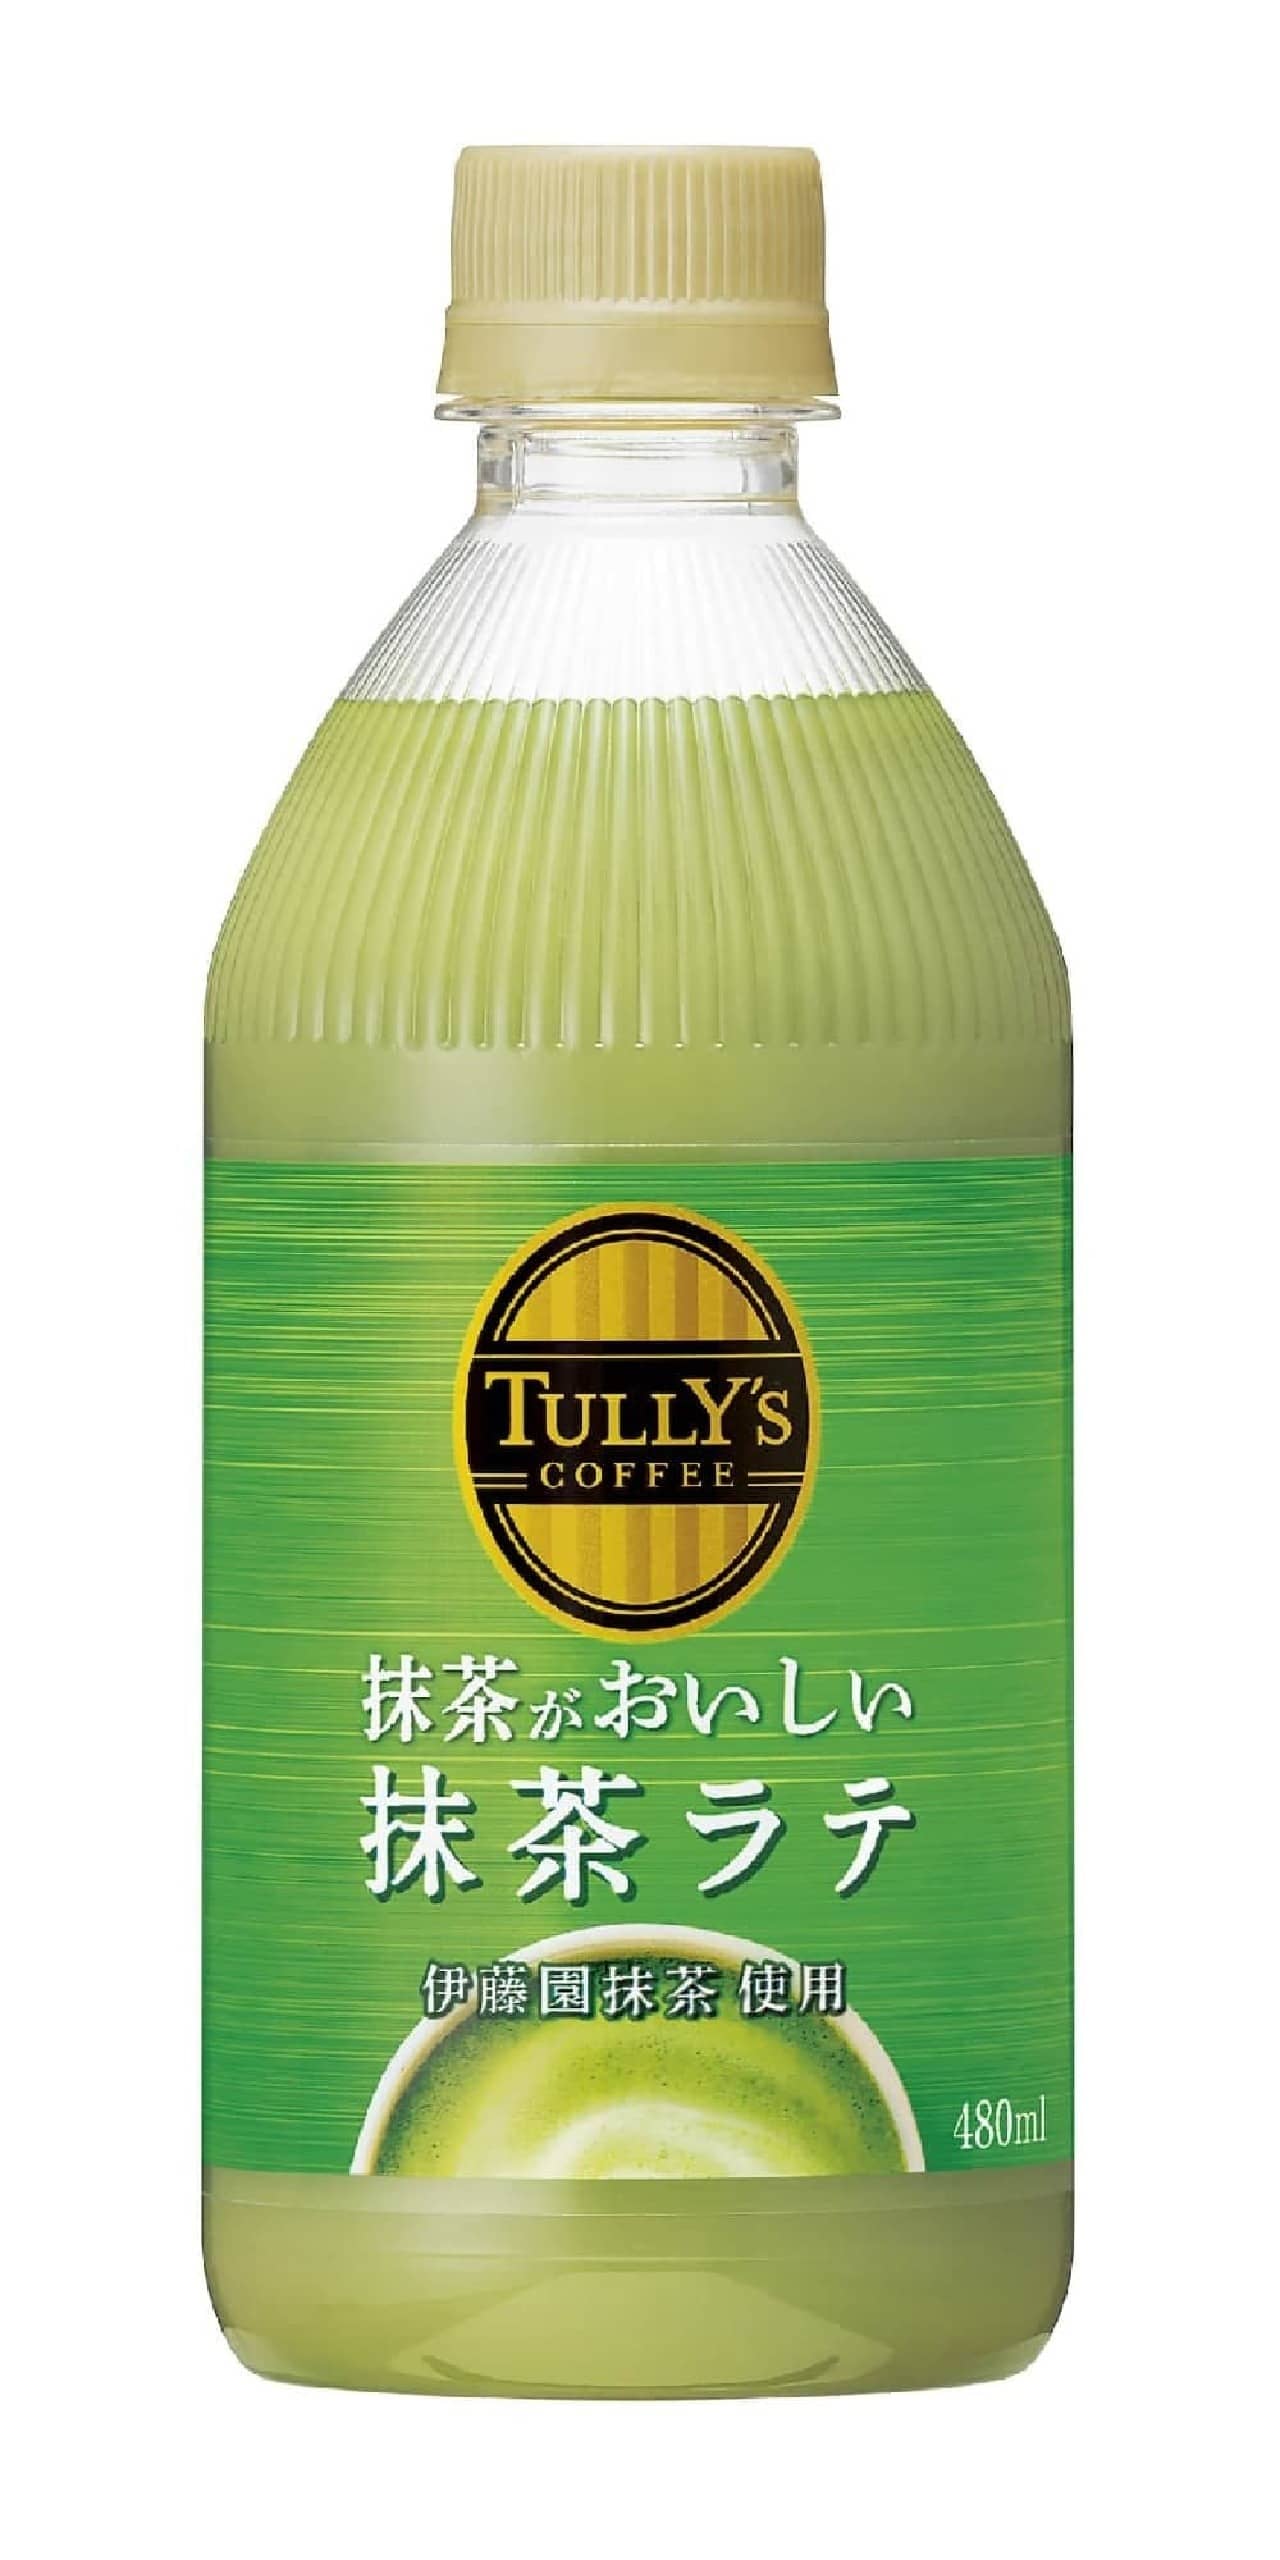 TULLY'S COFFEE "TULLY'S COFFEE Matcha Latte with Delicious Green Tea